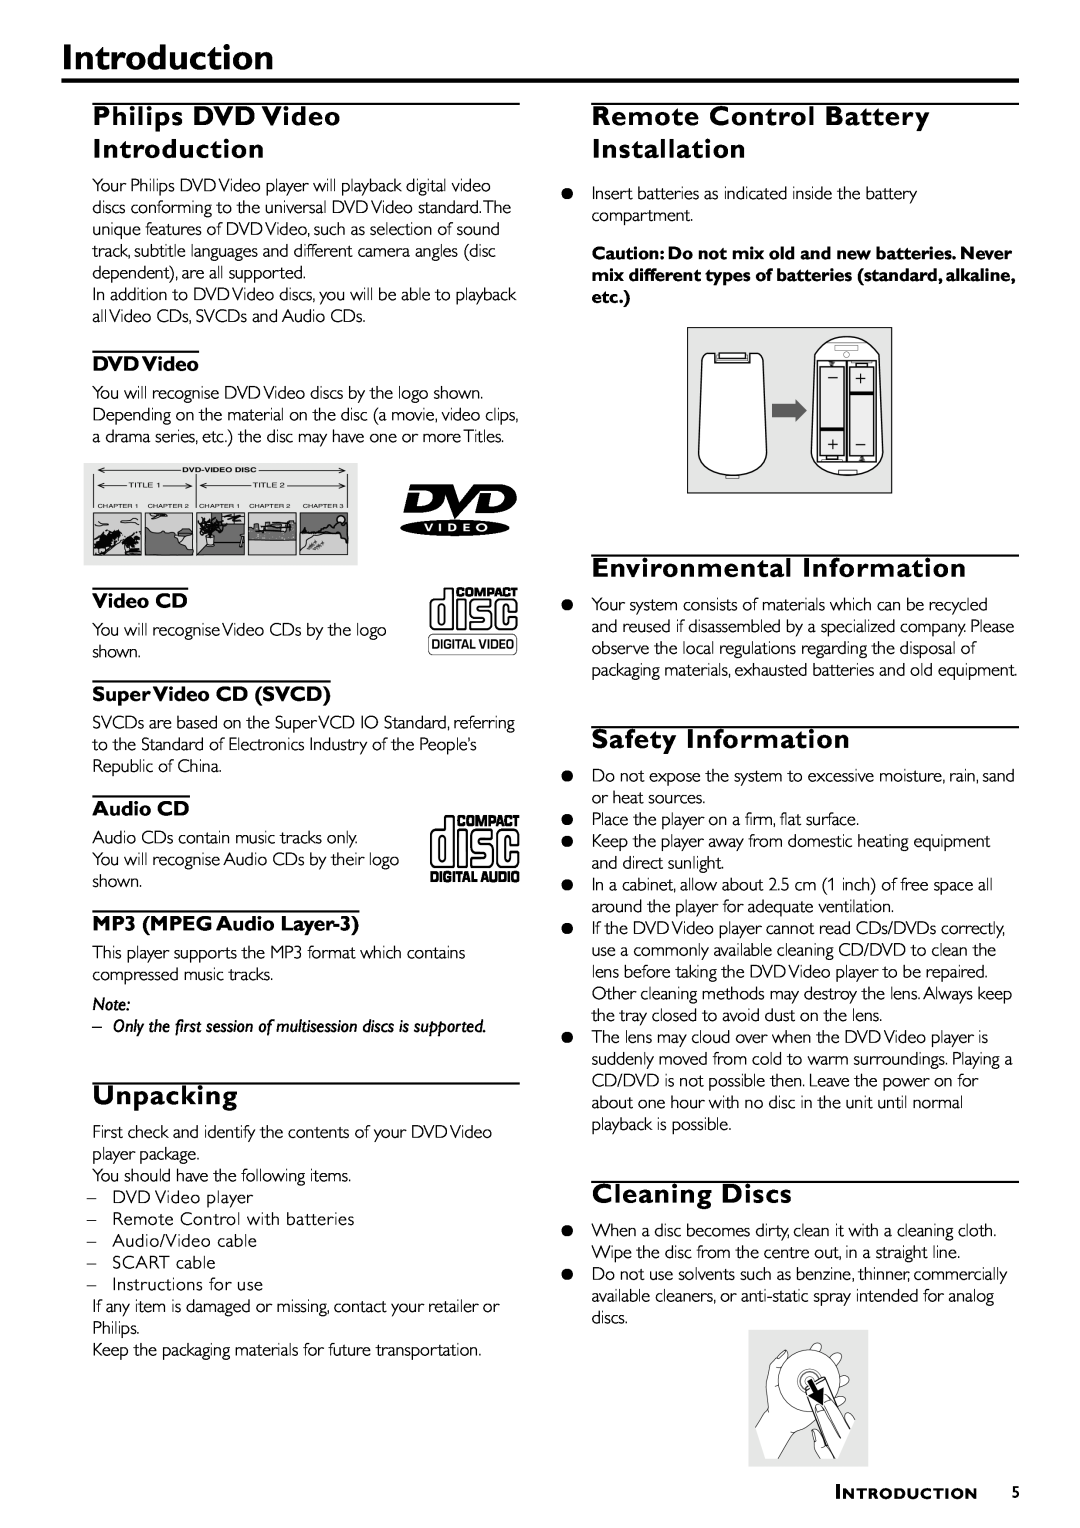 Philips DVD-762 Philips DVD Video Introduction, Unpacking, Remote Control Battery Installation, Safety Information 